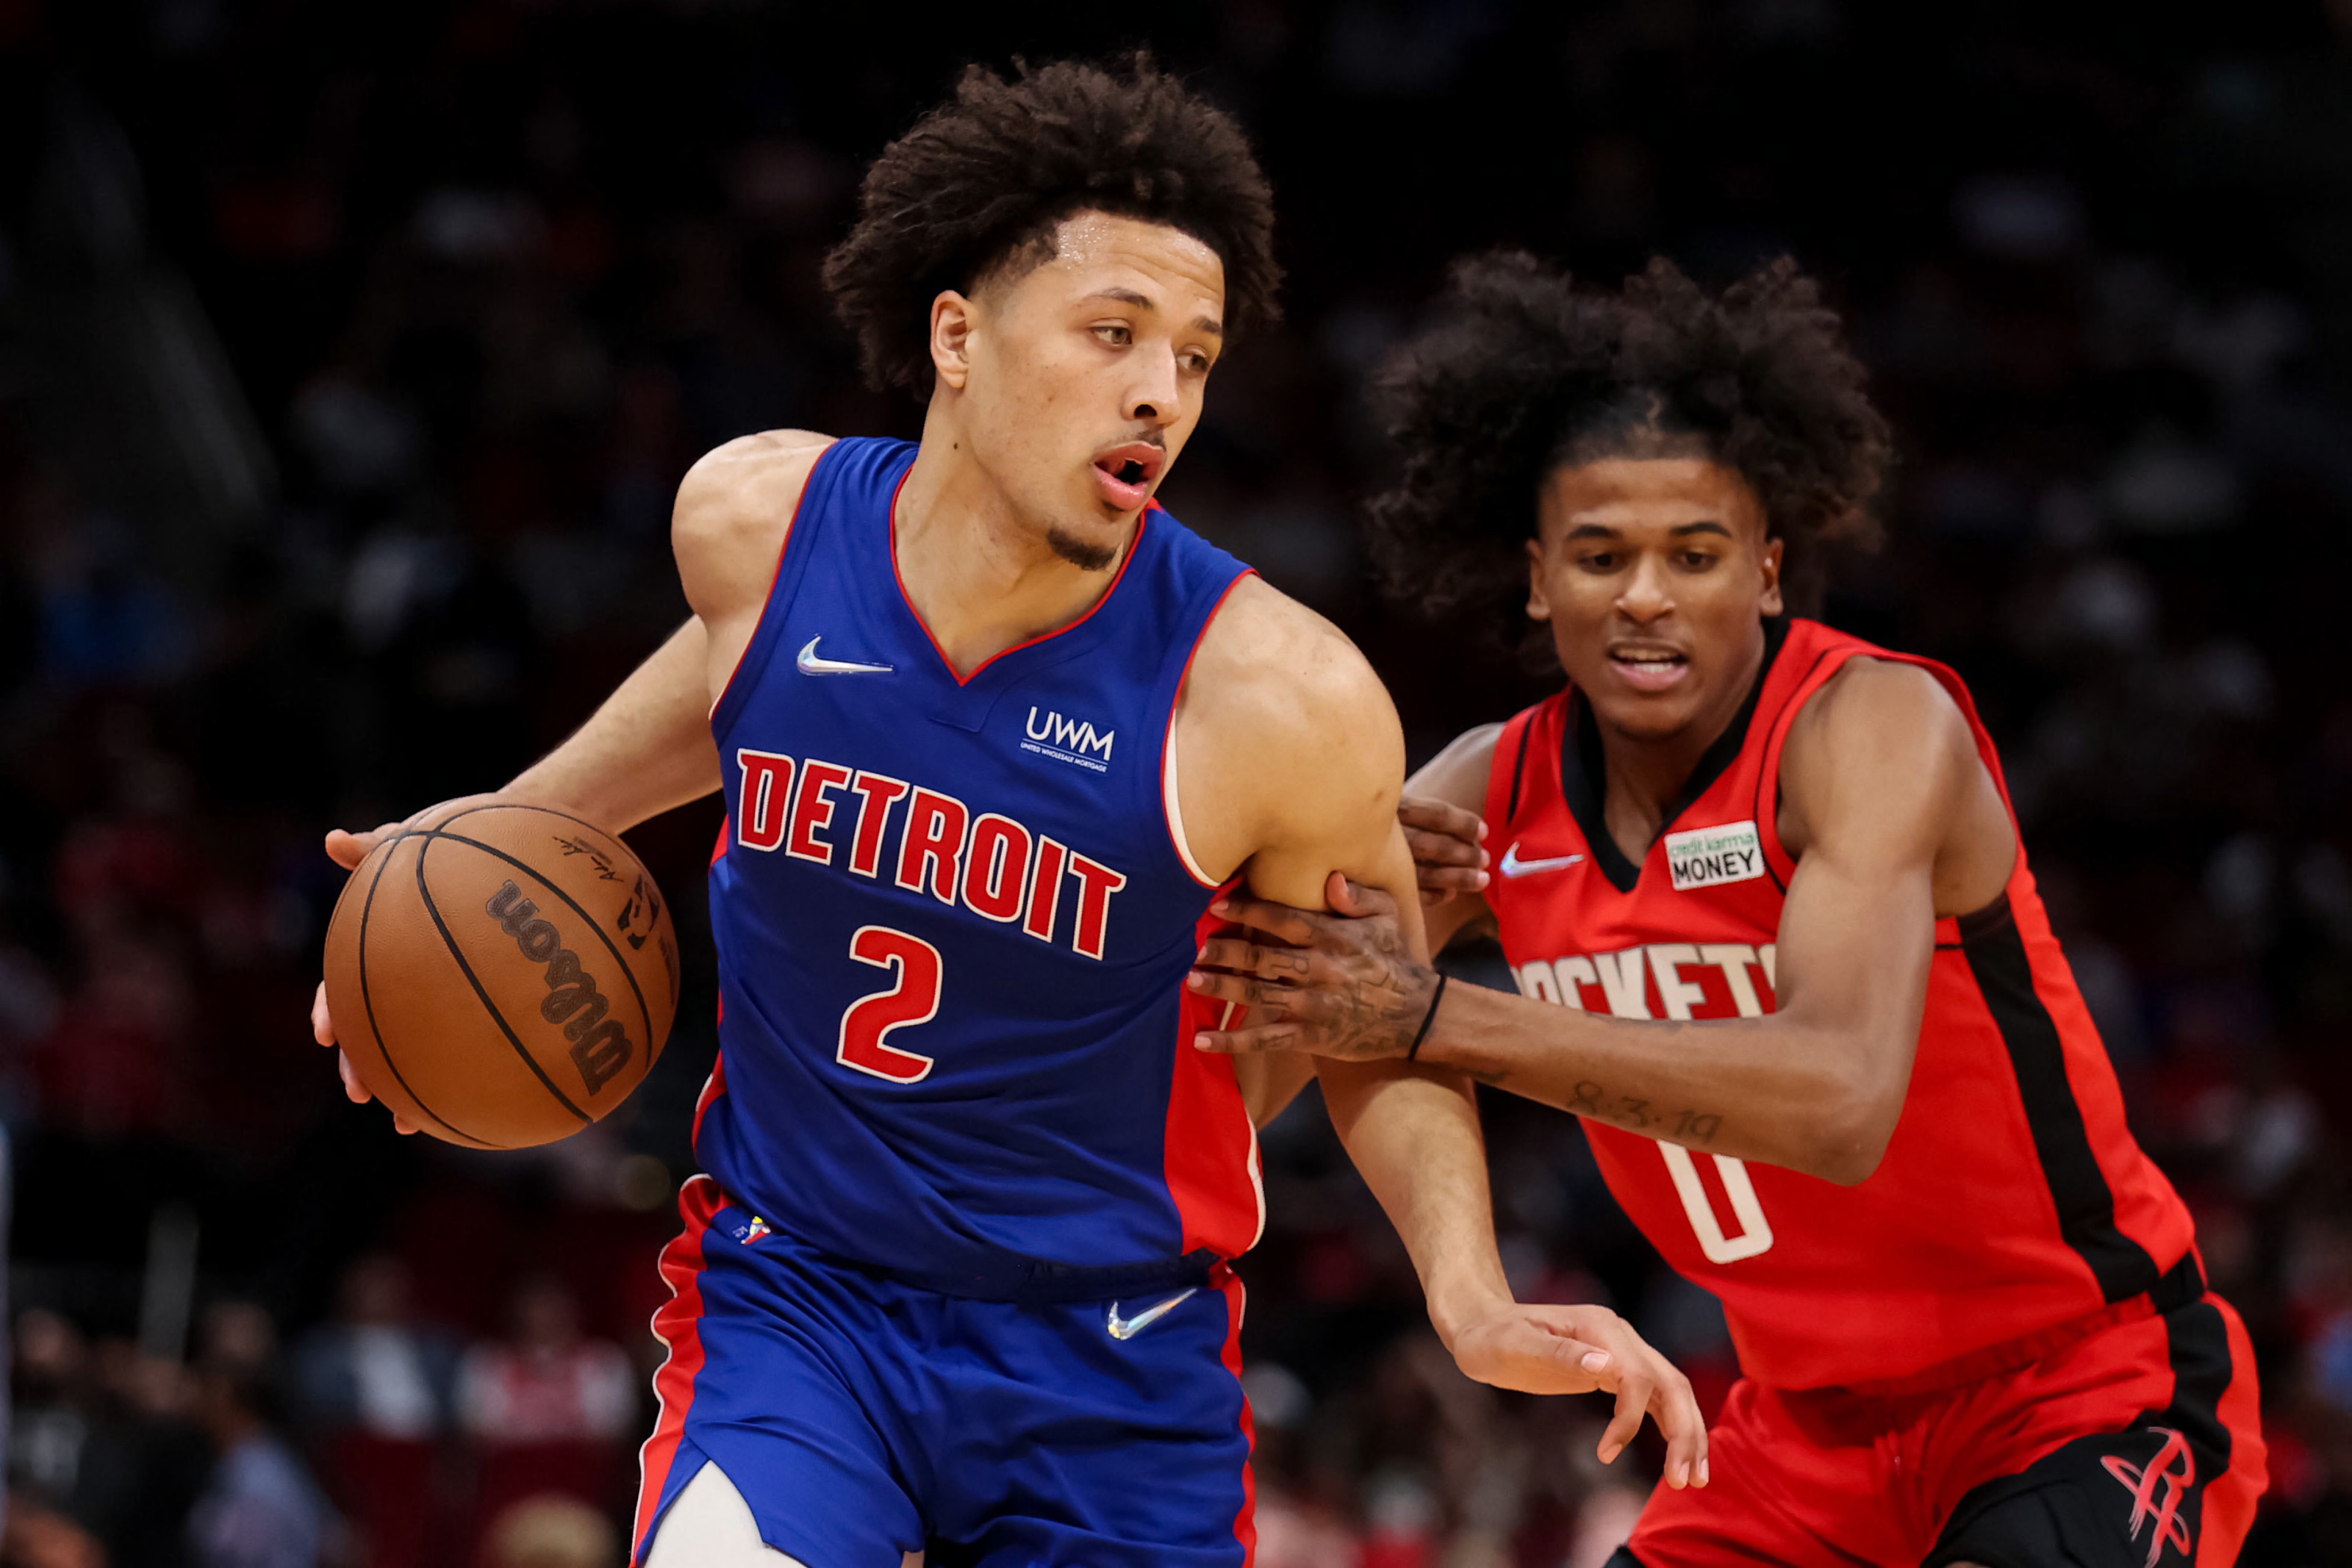 Detroit Pistons: Which bad team has the best young core? - Page 2